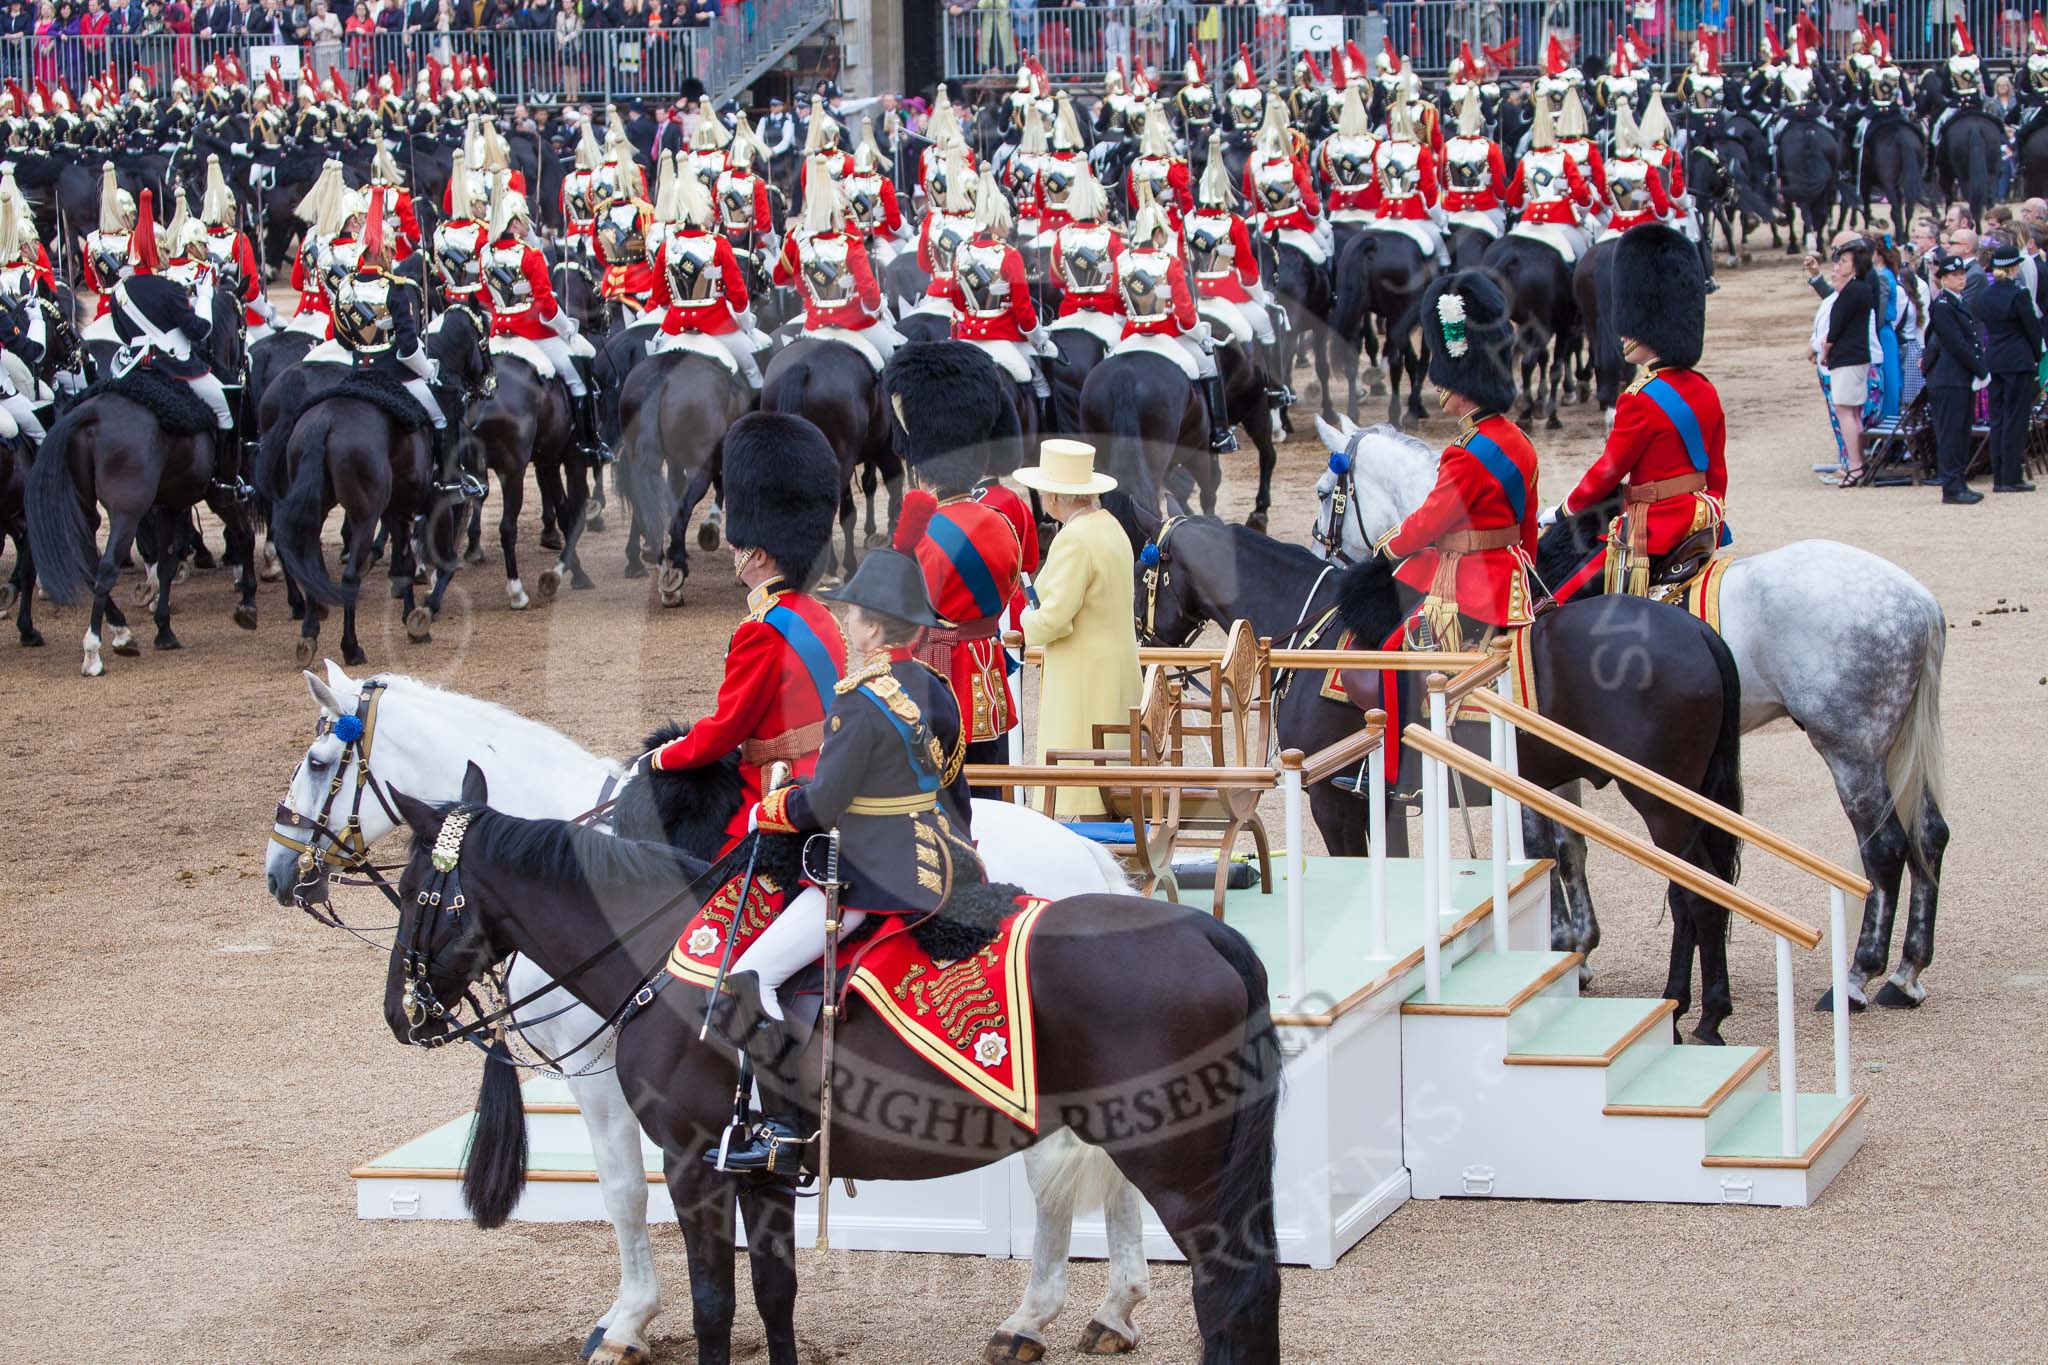 Trooping the Colour 2012: Watching the Ride Past - HRH The Princess Royal, HRH The Duke of Kent, HRH Prince Philip, HM The Queen, HRH The Prince of Wales, and HRH The Duke of Cambridge..
Horse Guards Parade, Westminster,
London SW1,

United Kingdom,
on 16 June 2012 at 12:00, image #598